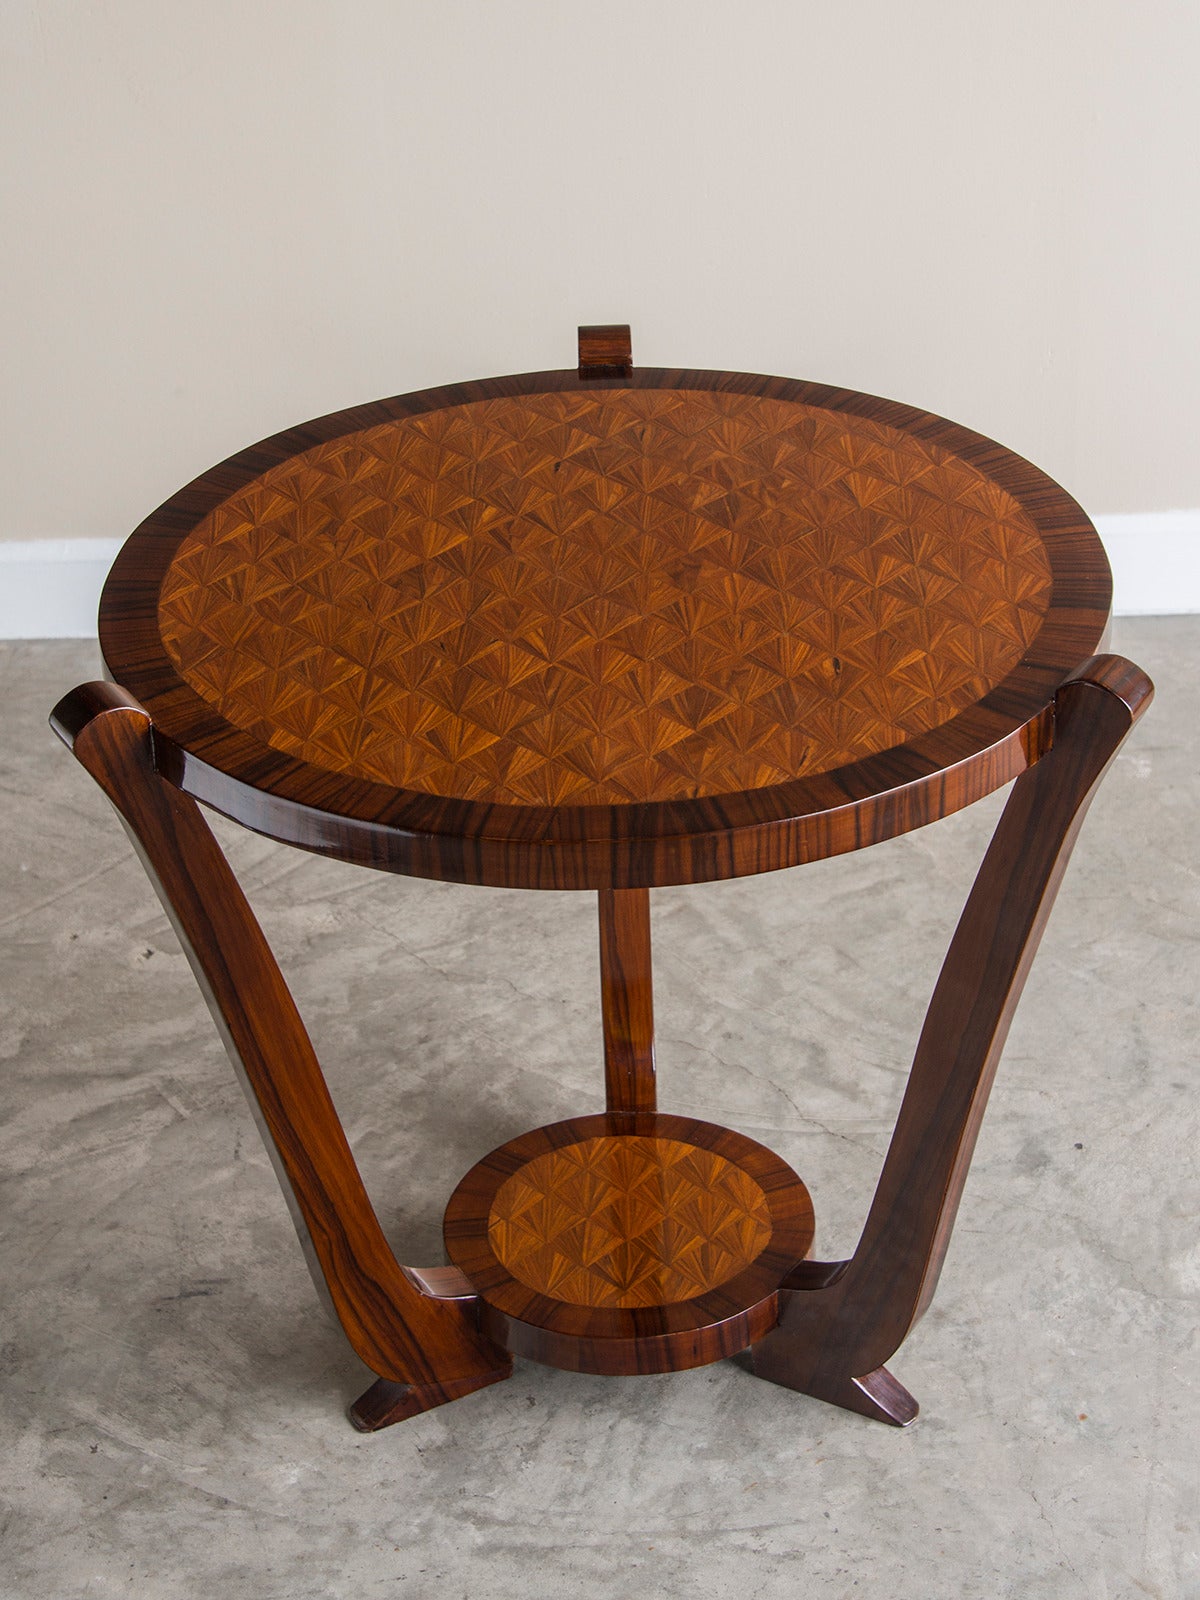 Mid-20th Century French Art Deco Palisander Table, Inlaid Detail, France, circa 1930